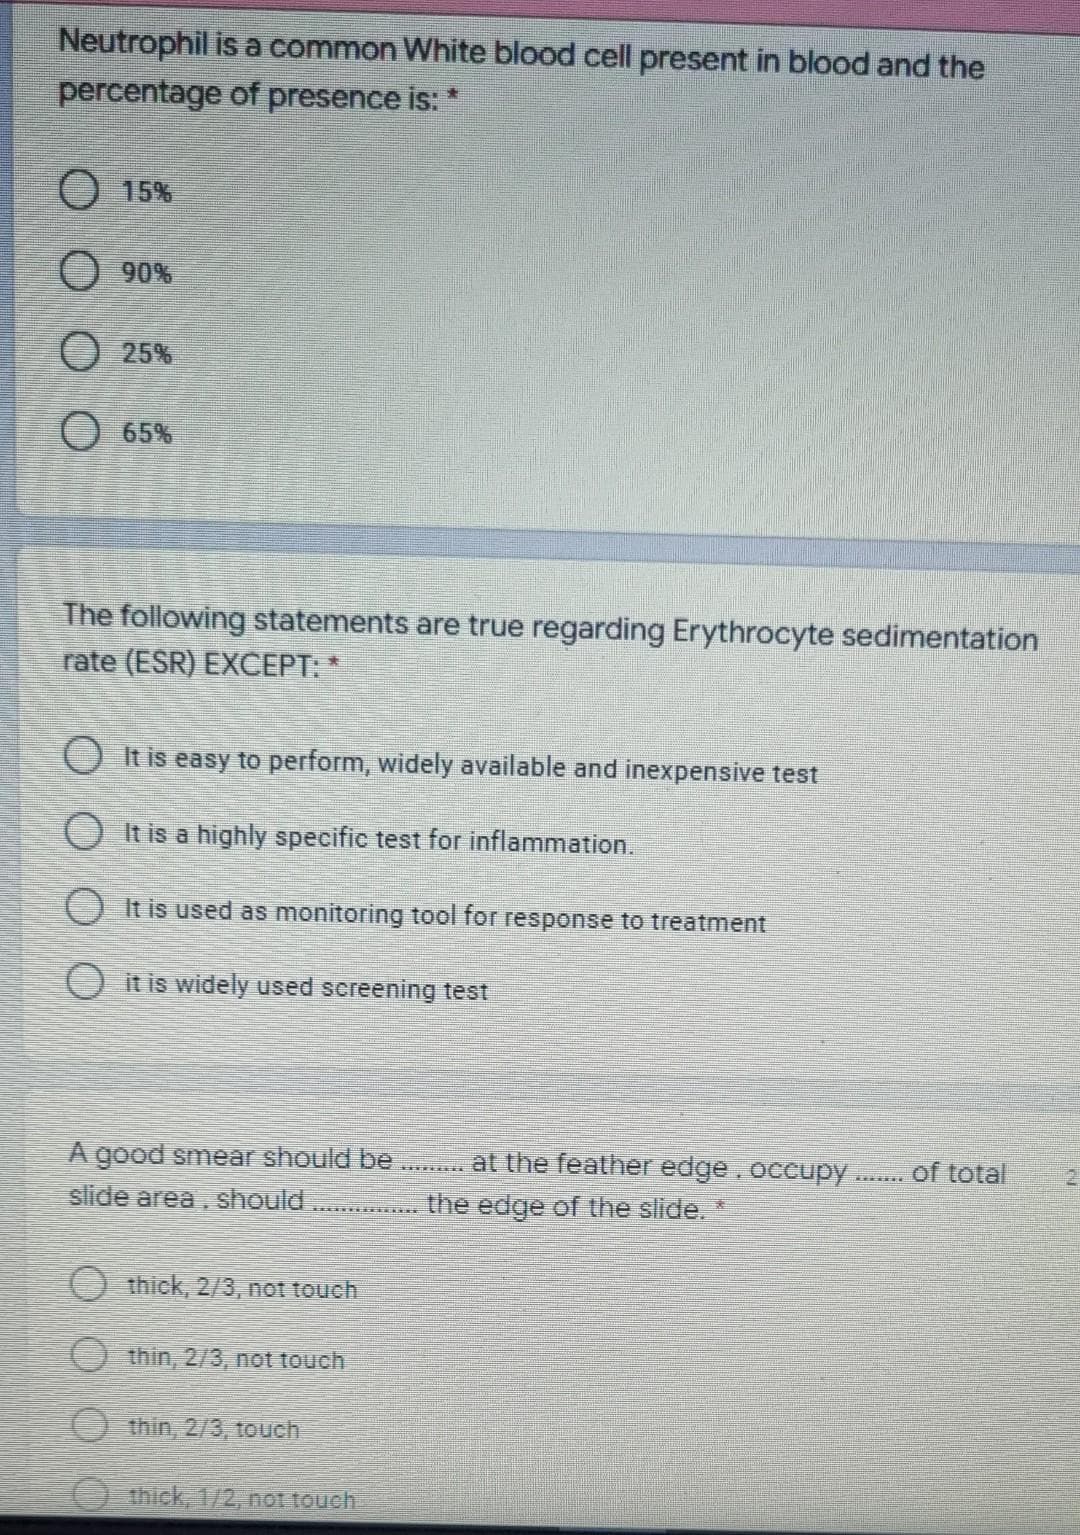 Neutrophil is a common White blood cell present in blood and the
percentage of presence is: *
O 15%
O 90%
O 25%
O 65%
The following statements are true regarding Erythrocyte sedimentation
rate (ESR) EXCEPT: *
O It is easy to perform, widely available and inexpensive test
O It is a highly specific test for inflammation.
O It is used as monitoring tool for response to treatment
O it is widely used sereening test
A good smear should be
slide area.
at the feather edge.occupy . of total
should
the edge of the slide. *
O thick, 2/3, not touch
O thin, 2/3, not touch
O thin, 2/3, touch
O thick, 1/2, not touch
DOO
